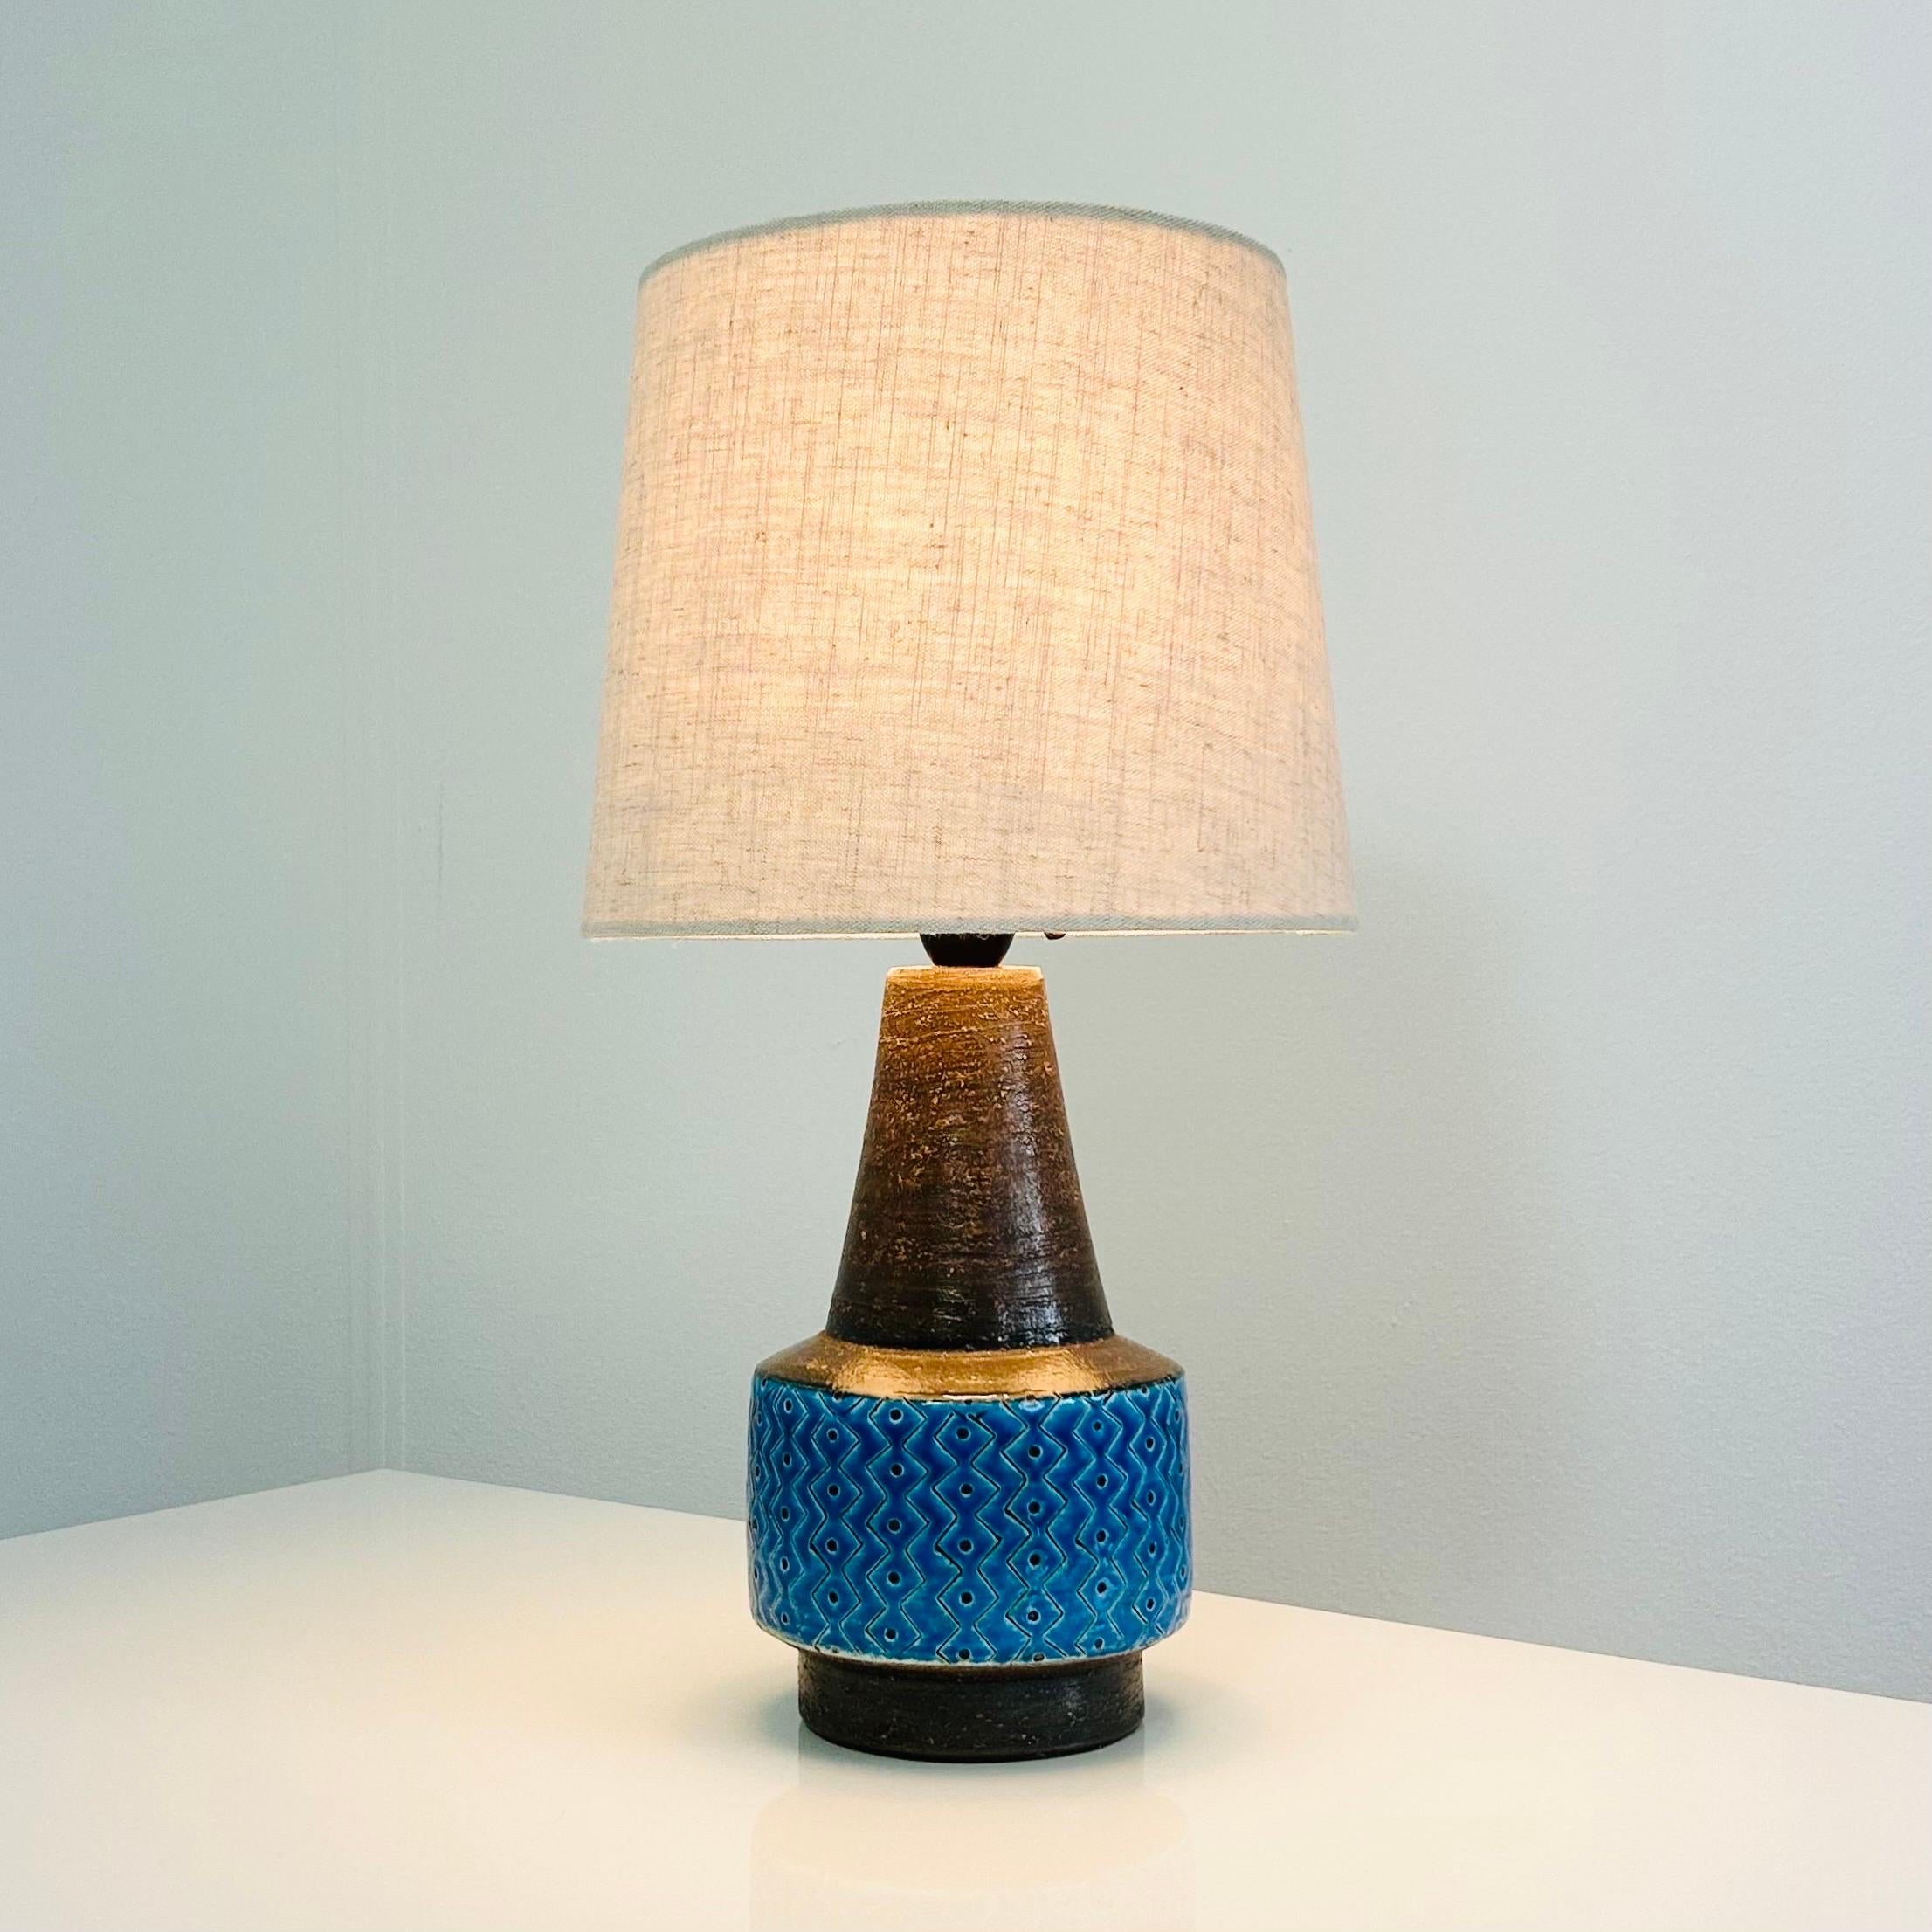 A rare stoneware desk lamp by Svend Aage Holm Sørensen stoneware made in the in the 1950s. It is truly perfect piece. 

* A stoneware desk lams with blue glaze and a beige fabric shade
* Designer: Svend Aage Holm Sørensen
* Producer: Holm Sørensen &